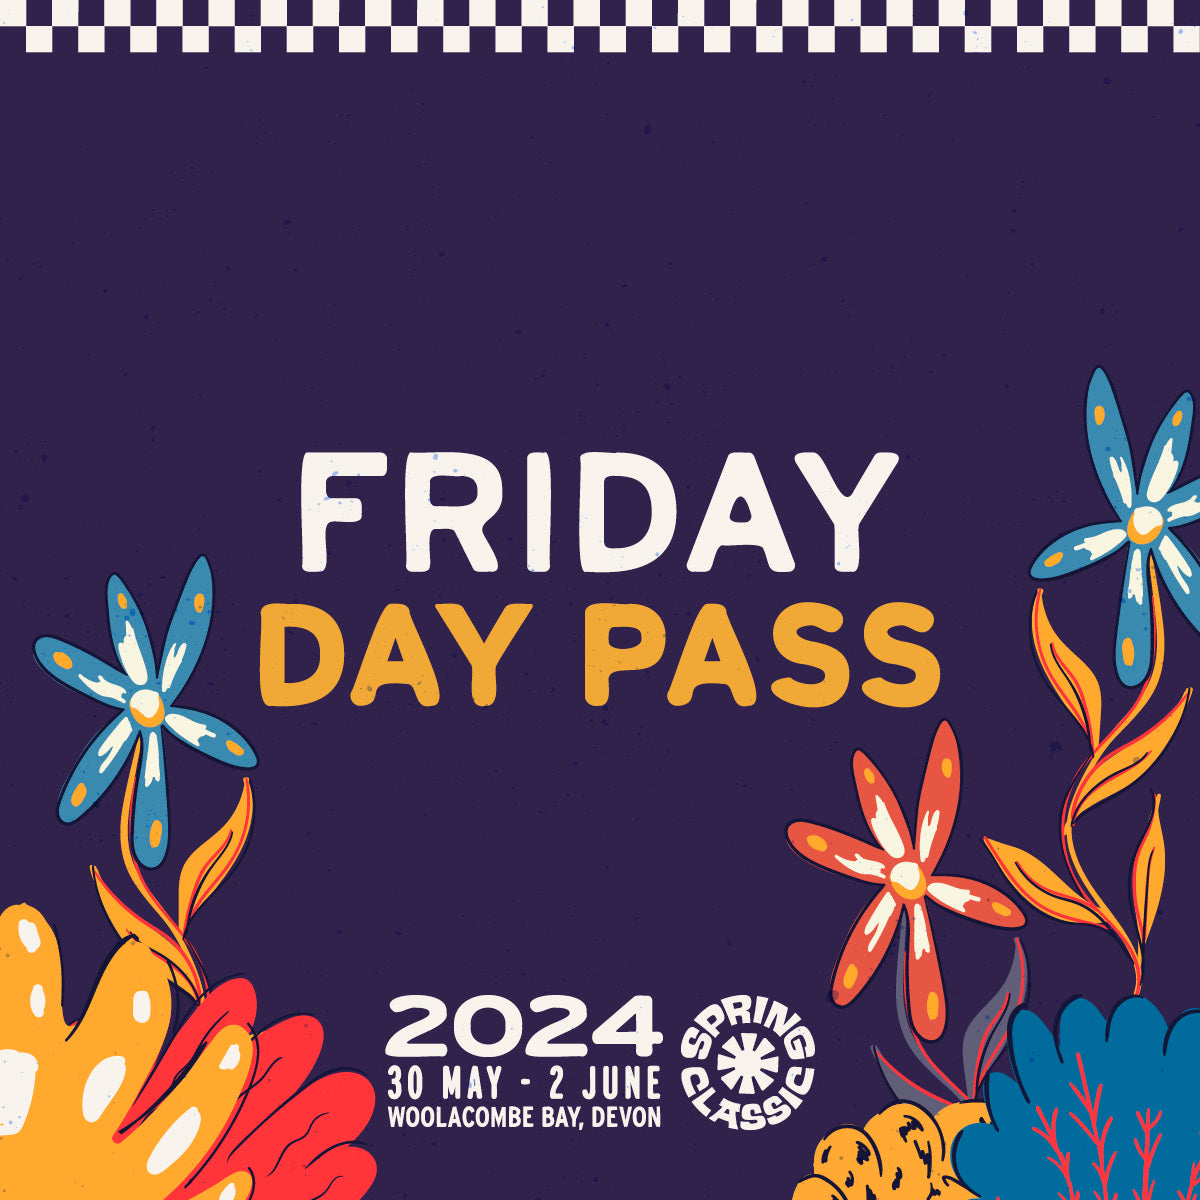 Friday Day Pass 2024